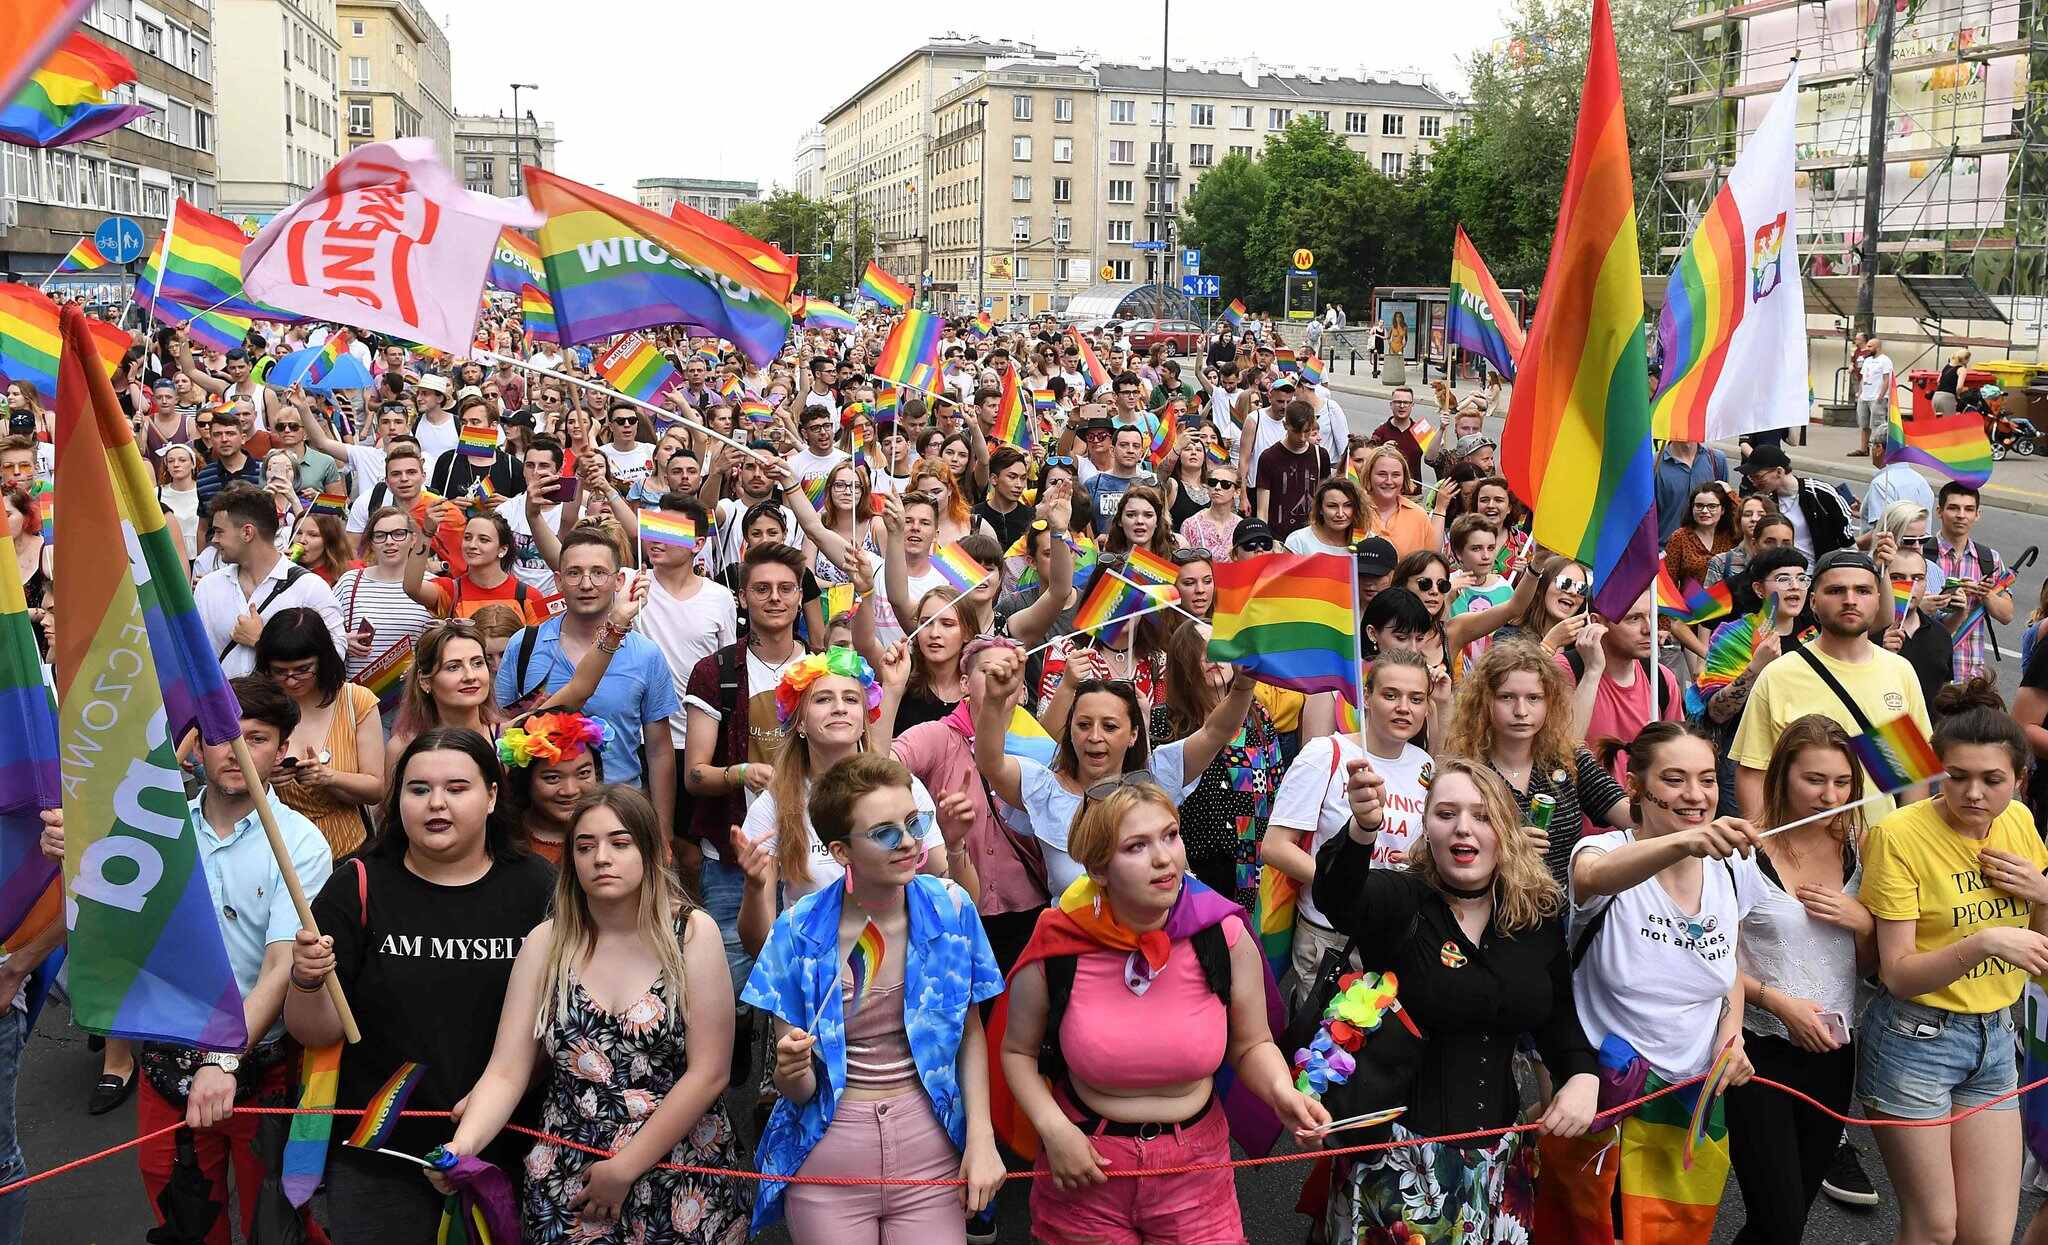 20-facts-about-gay-pride-parade